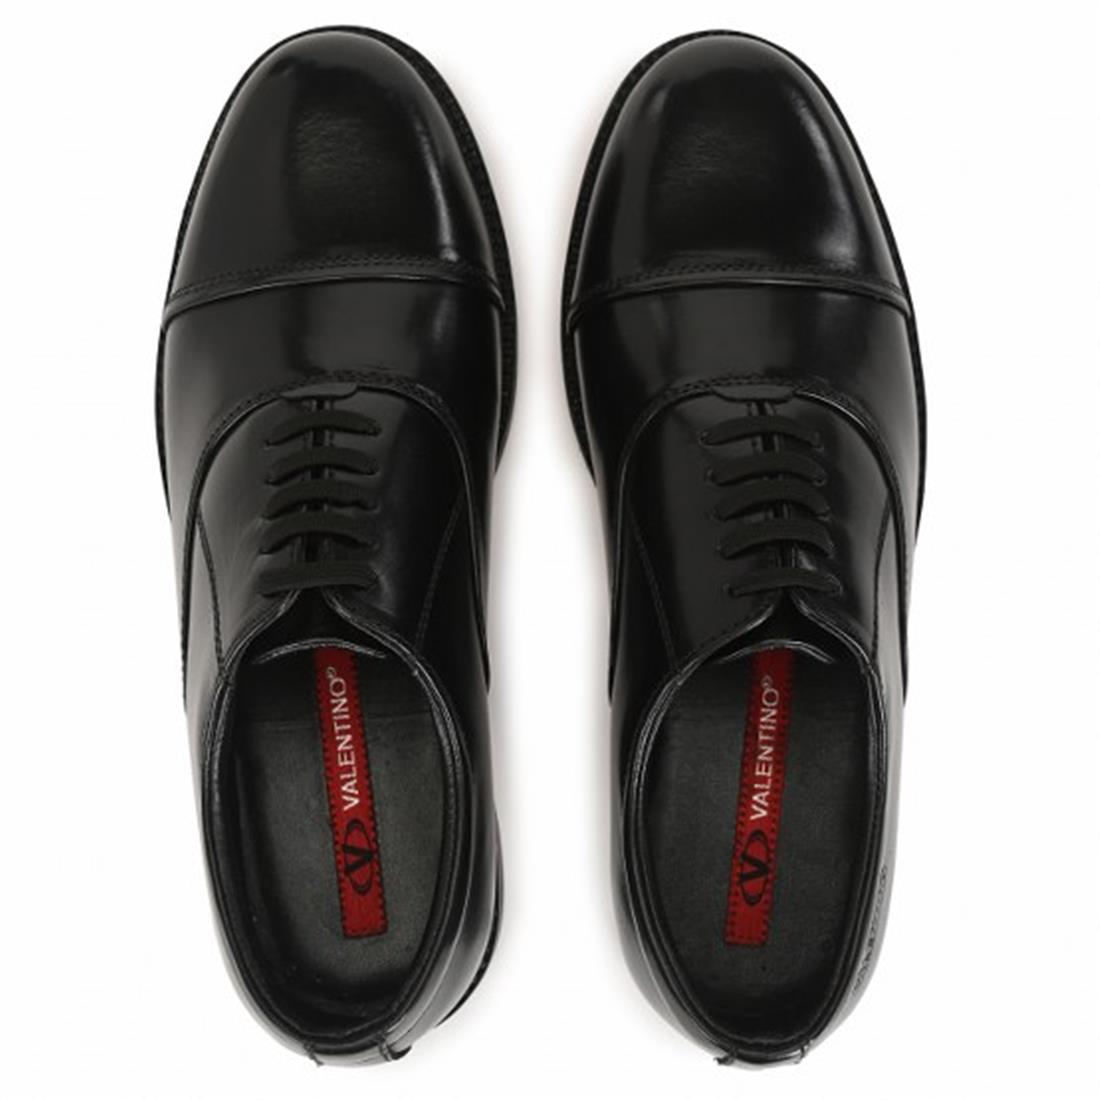 EXECUTIVE-61A MEN LEATHER BLACK FORMAL LACE UP SHOES AIR FORCE ONE